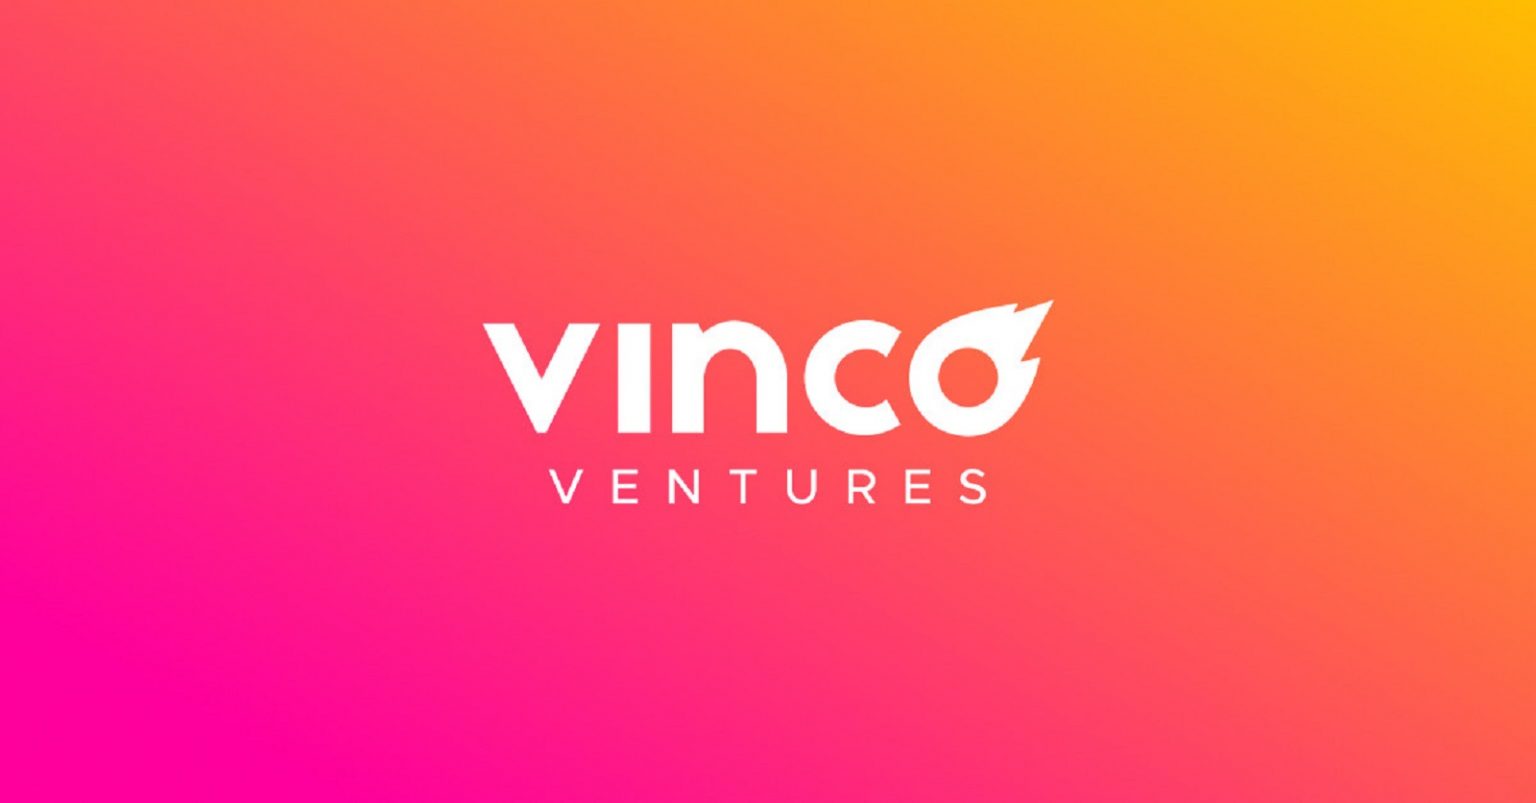 Vinco Ventures Is Just a Flash in the Pan Meme Stock ...